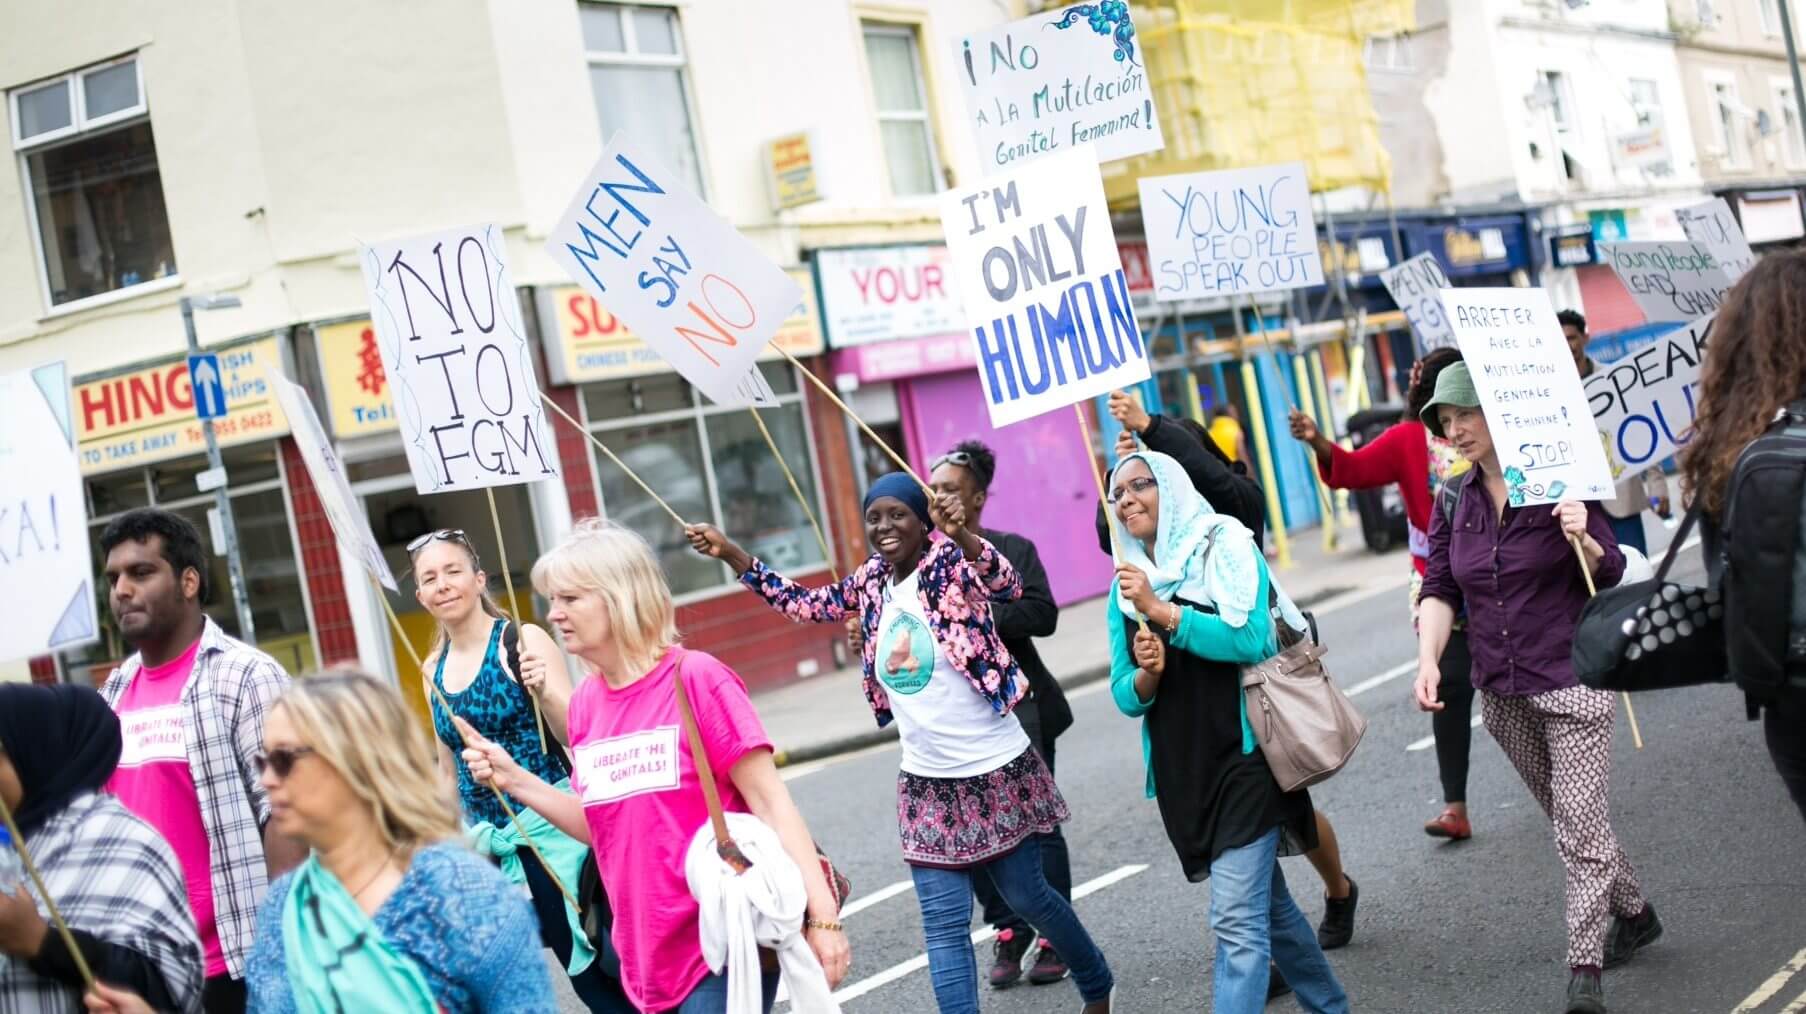 FORWARD In The News “Bristol Youth March Against FGM”